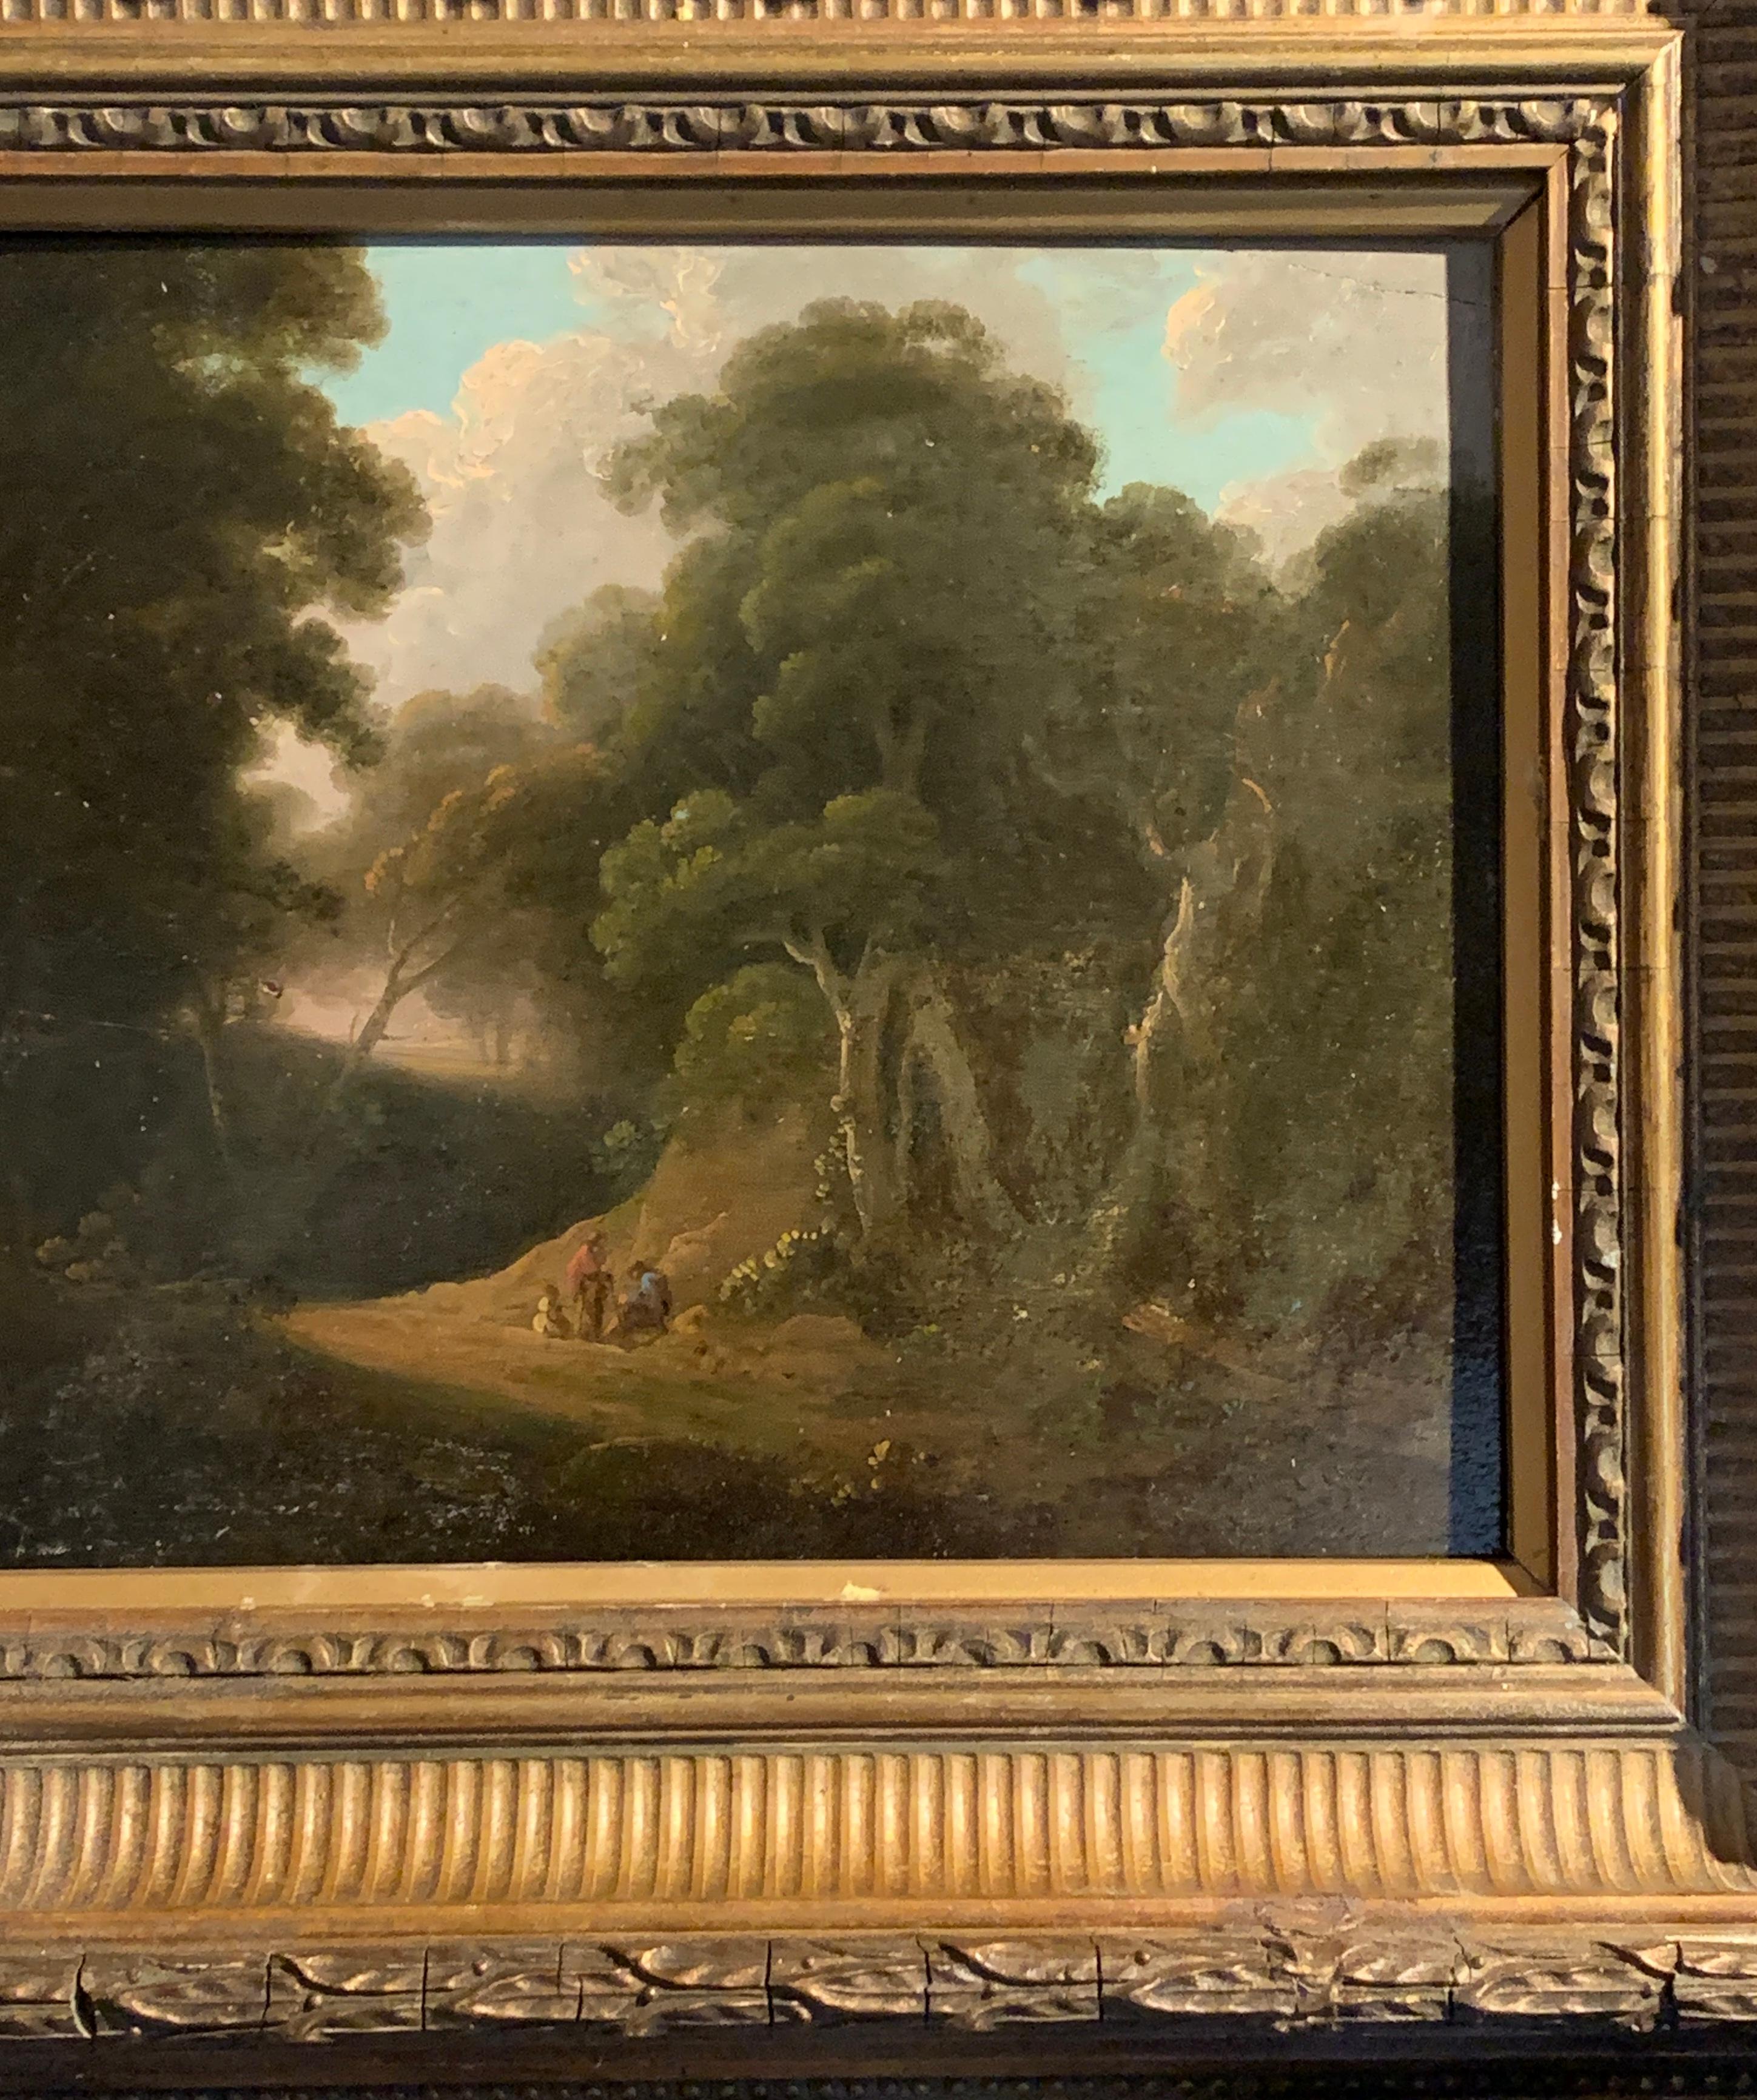 18th century English tree lined landscape with a pathway with figures resting. - Painting by John Rathbone